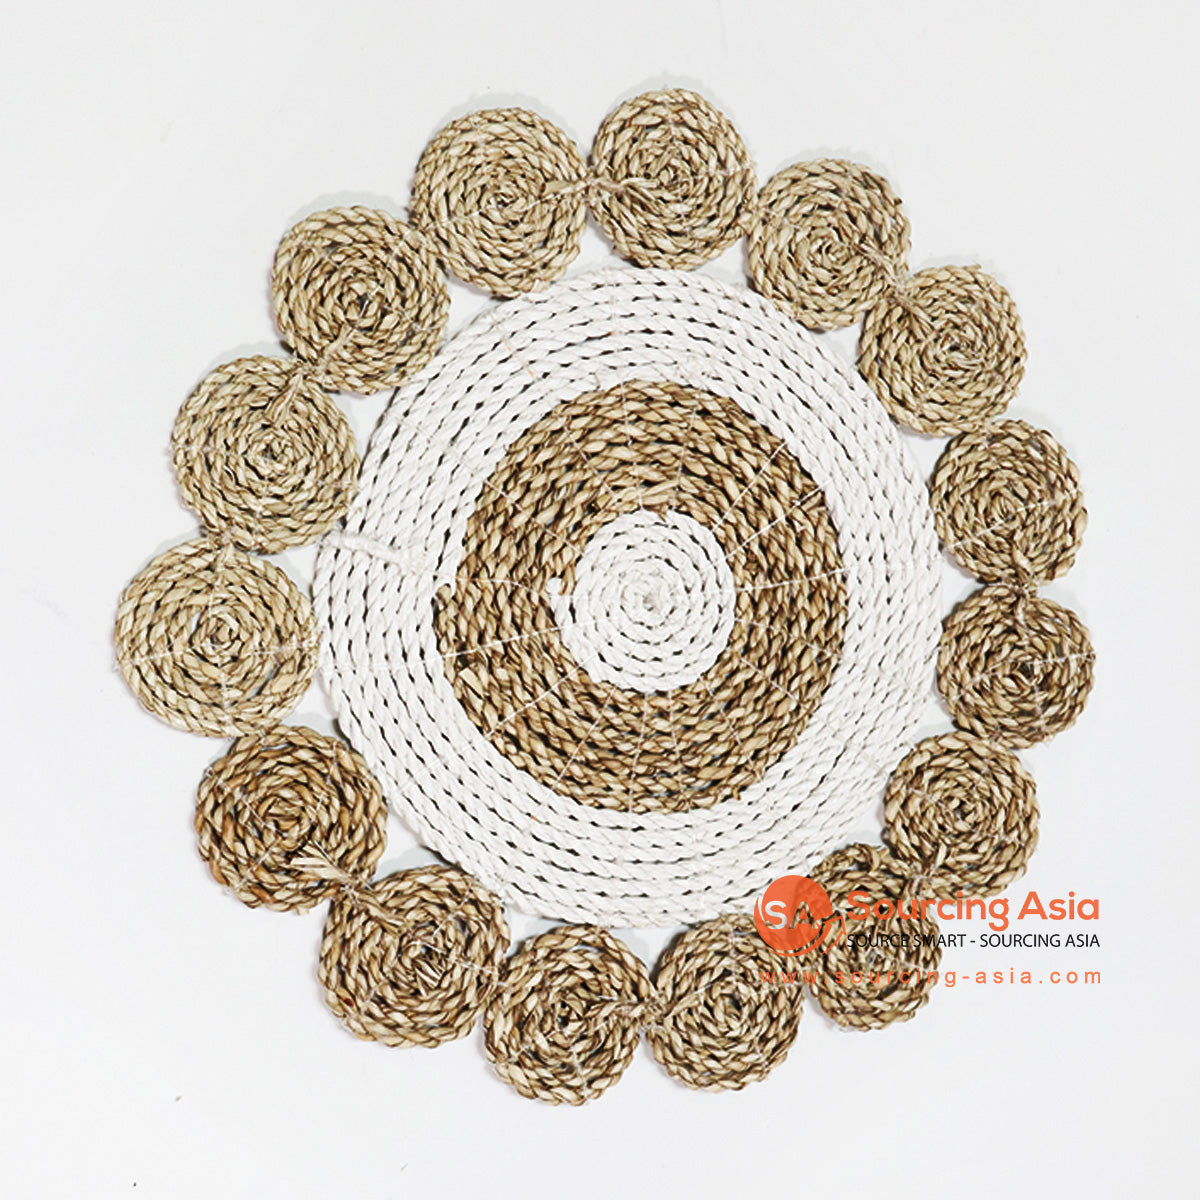 HBSC013-4 NATURAL AND WHITE MENDONG DECORATIVE PLACEMAT